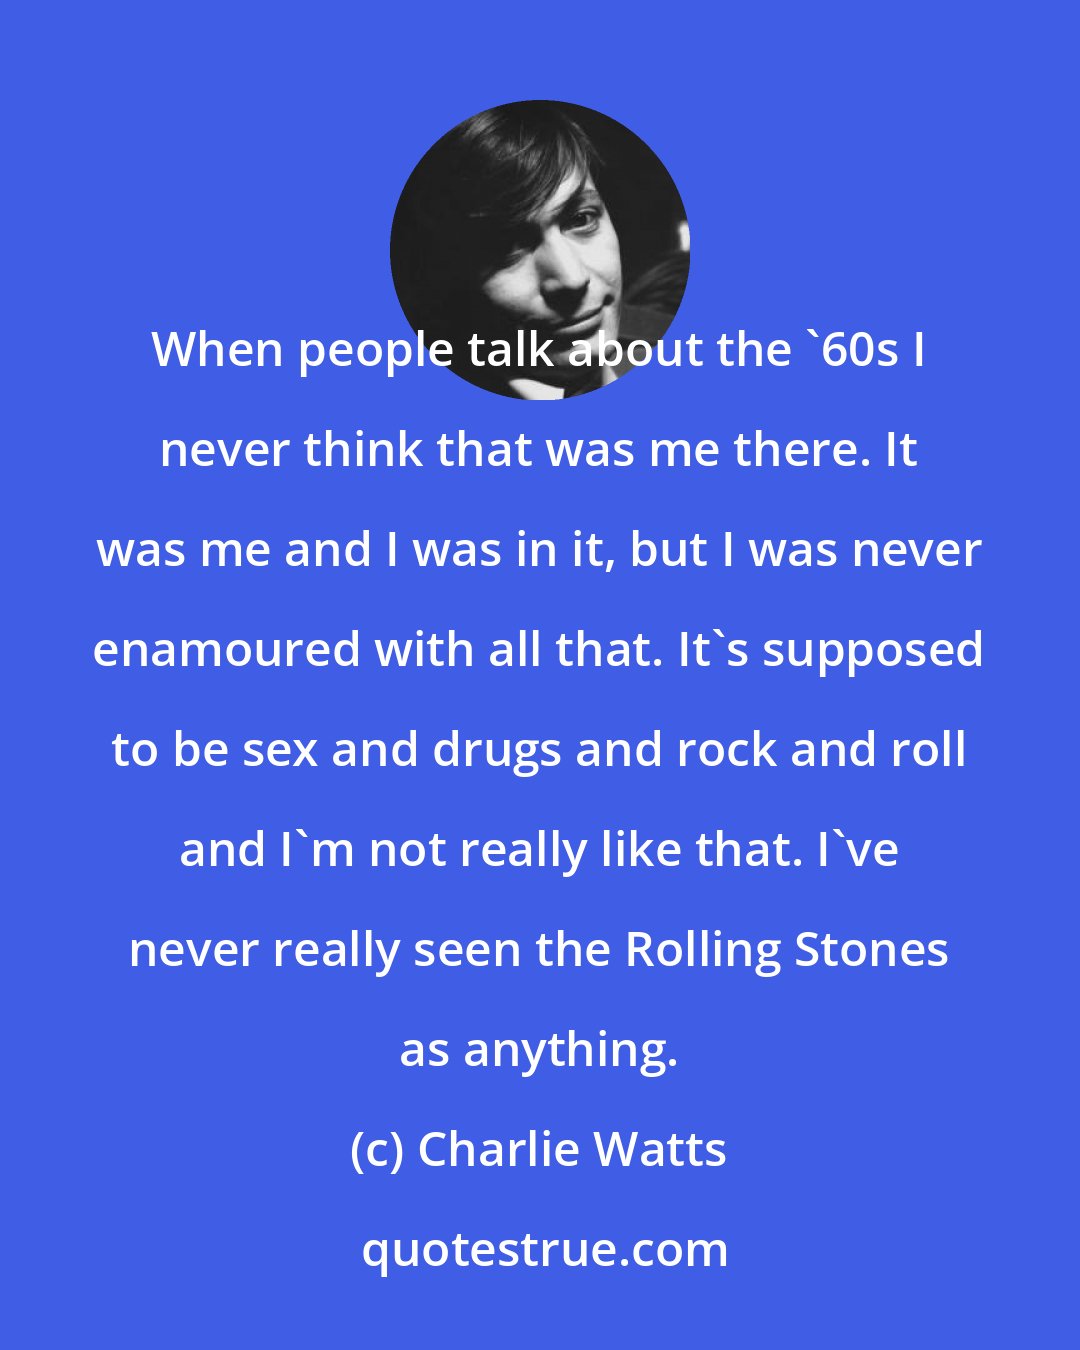 Charlie Watts: When people talk about the '60s I never think that was me there. It was me and I was in it, but I was never enamoured with all that. It's supposed to be sex and drugs and rock and roll and I'm not really like that. I've never really seen the Rolling Stones as anything.